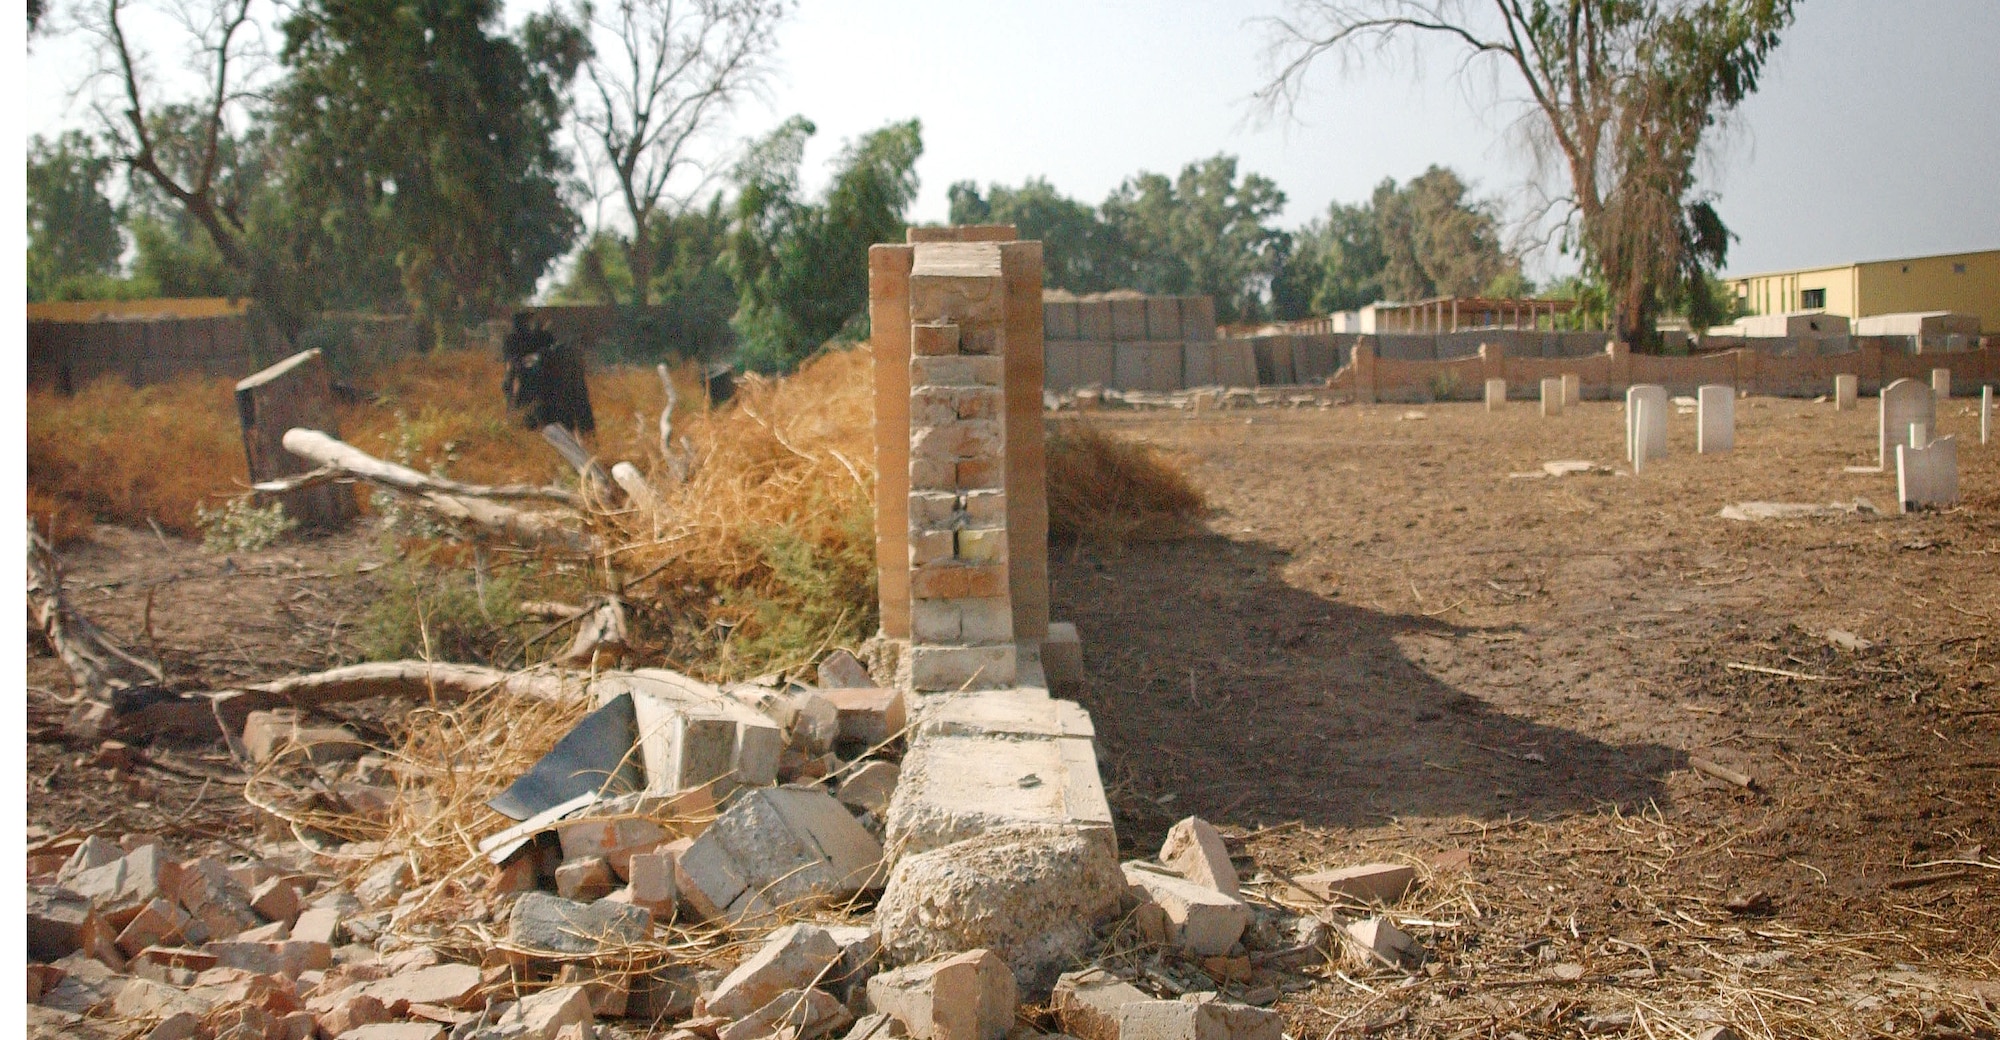 To the right of the wall is a British cemetery located at Camp Habbaniyah, Iraq, as it looks today following the clean-up and maintenance efforts of Camp Habbaniyah personnel, including members of the 732nd Regional Support Unit Habbaniyah. To the left is a similar scene of what the volunteers faced when clean-up work began. (U.S. Air Force Photo/1st Lt. Landon Derentz) 